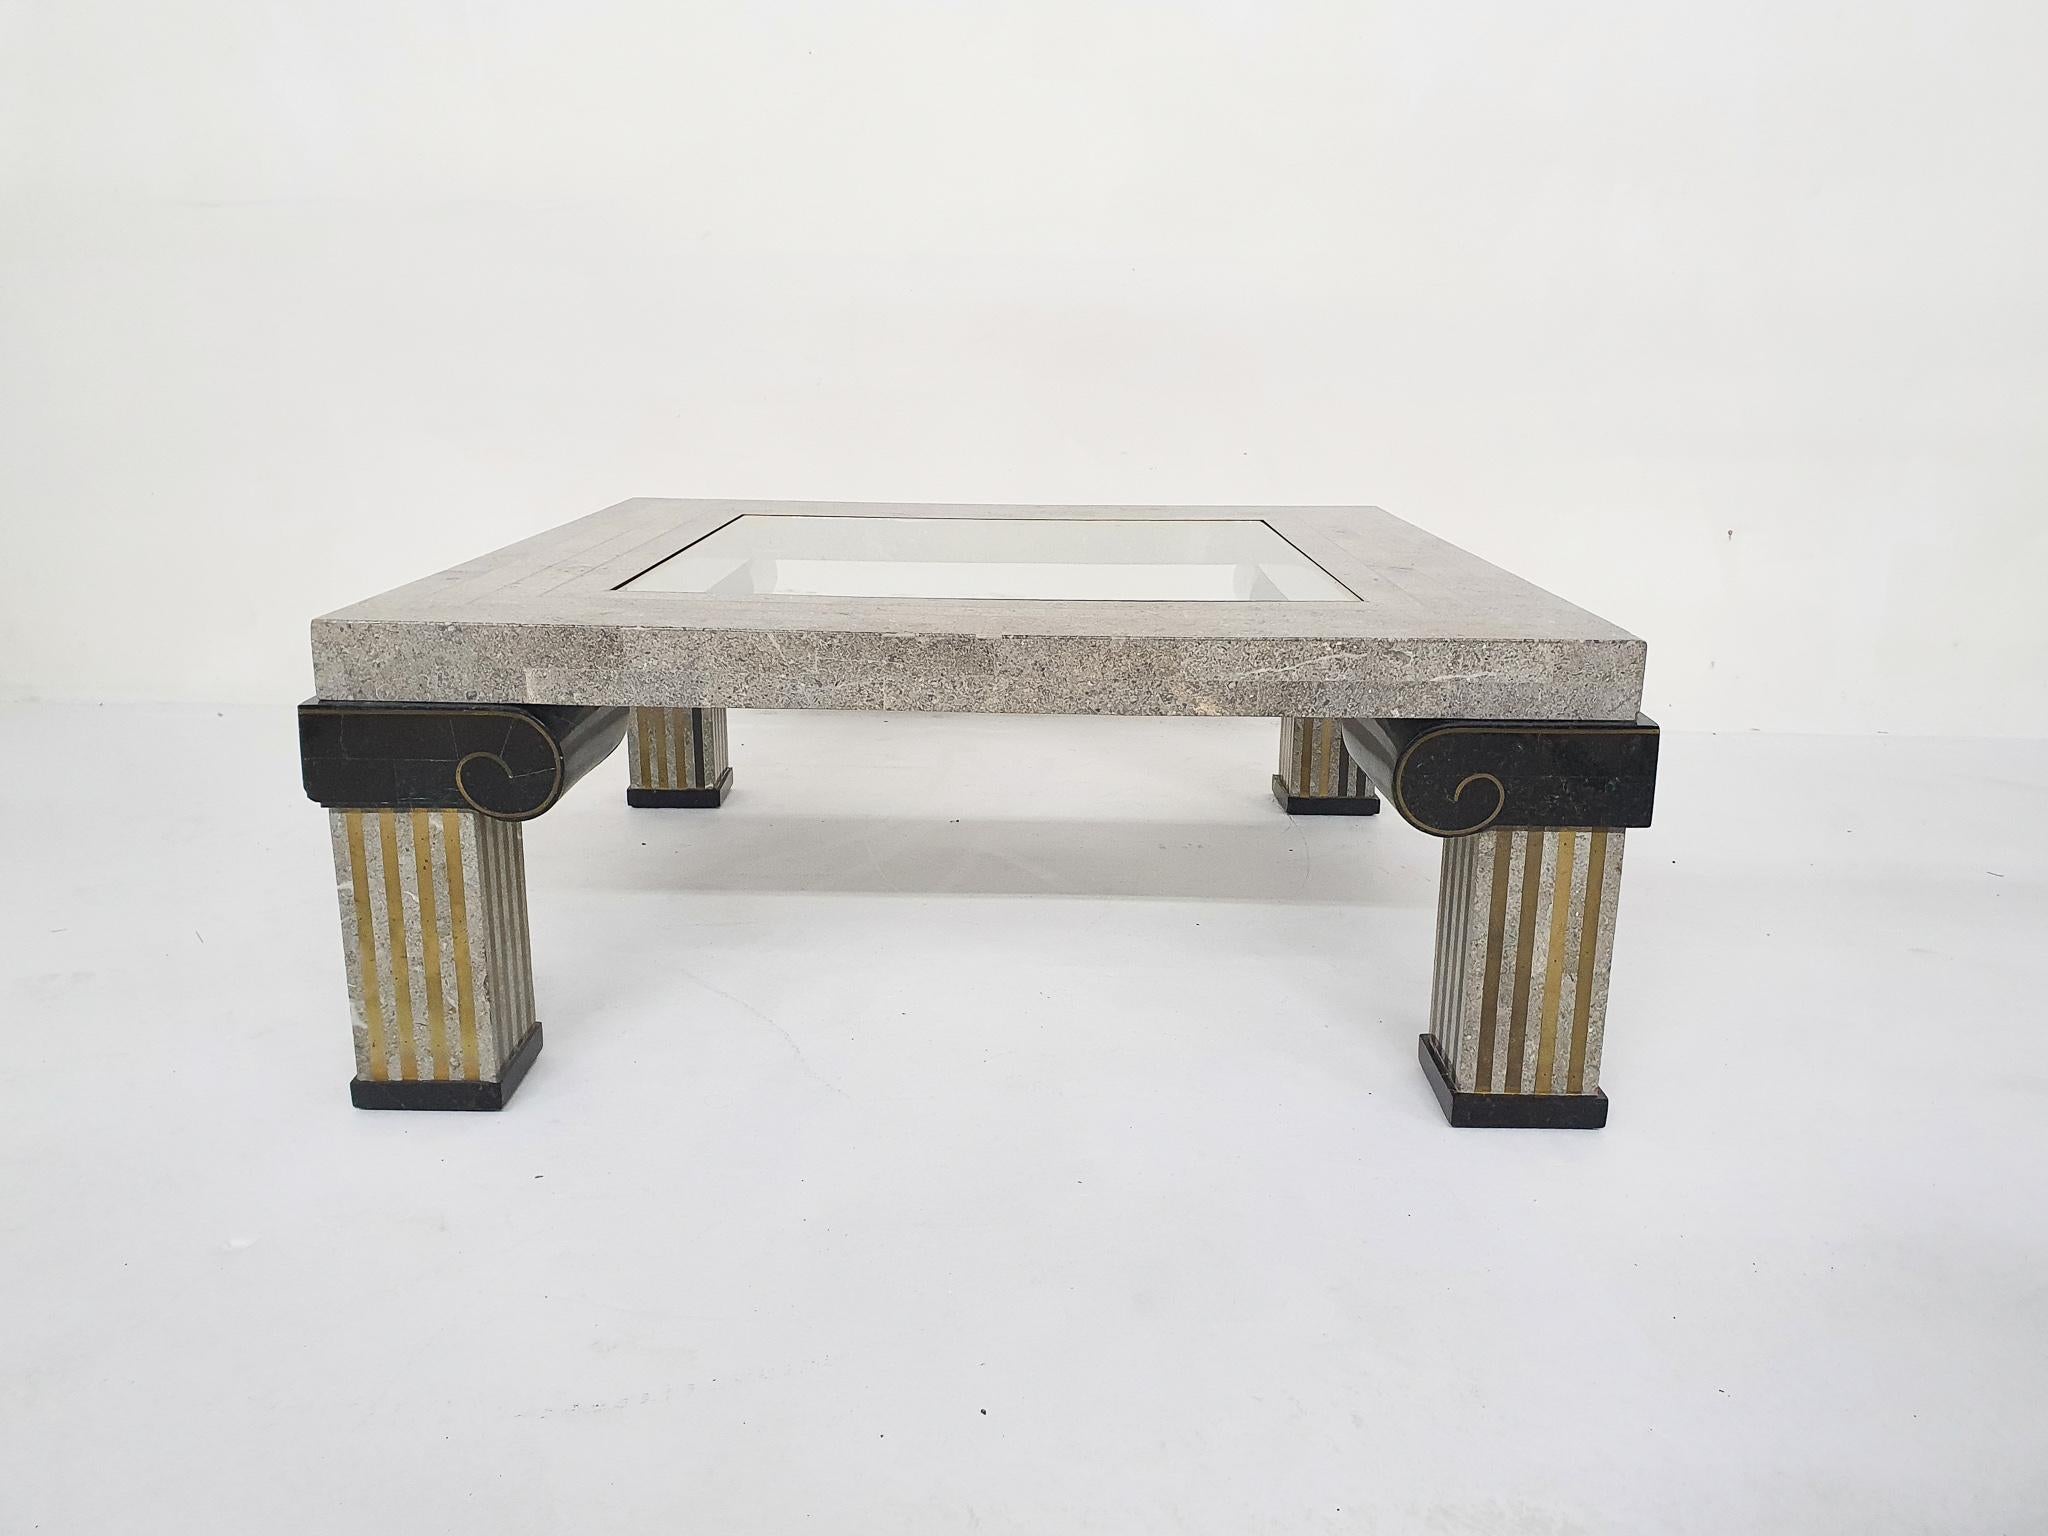 Stone coffee tables with brass inlay attributed to Maitland-Smith.
Glass top has a small chip from the corner.